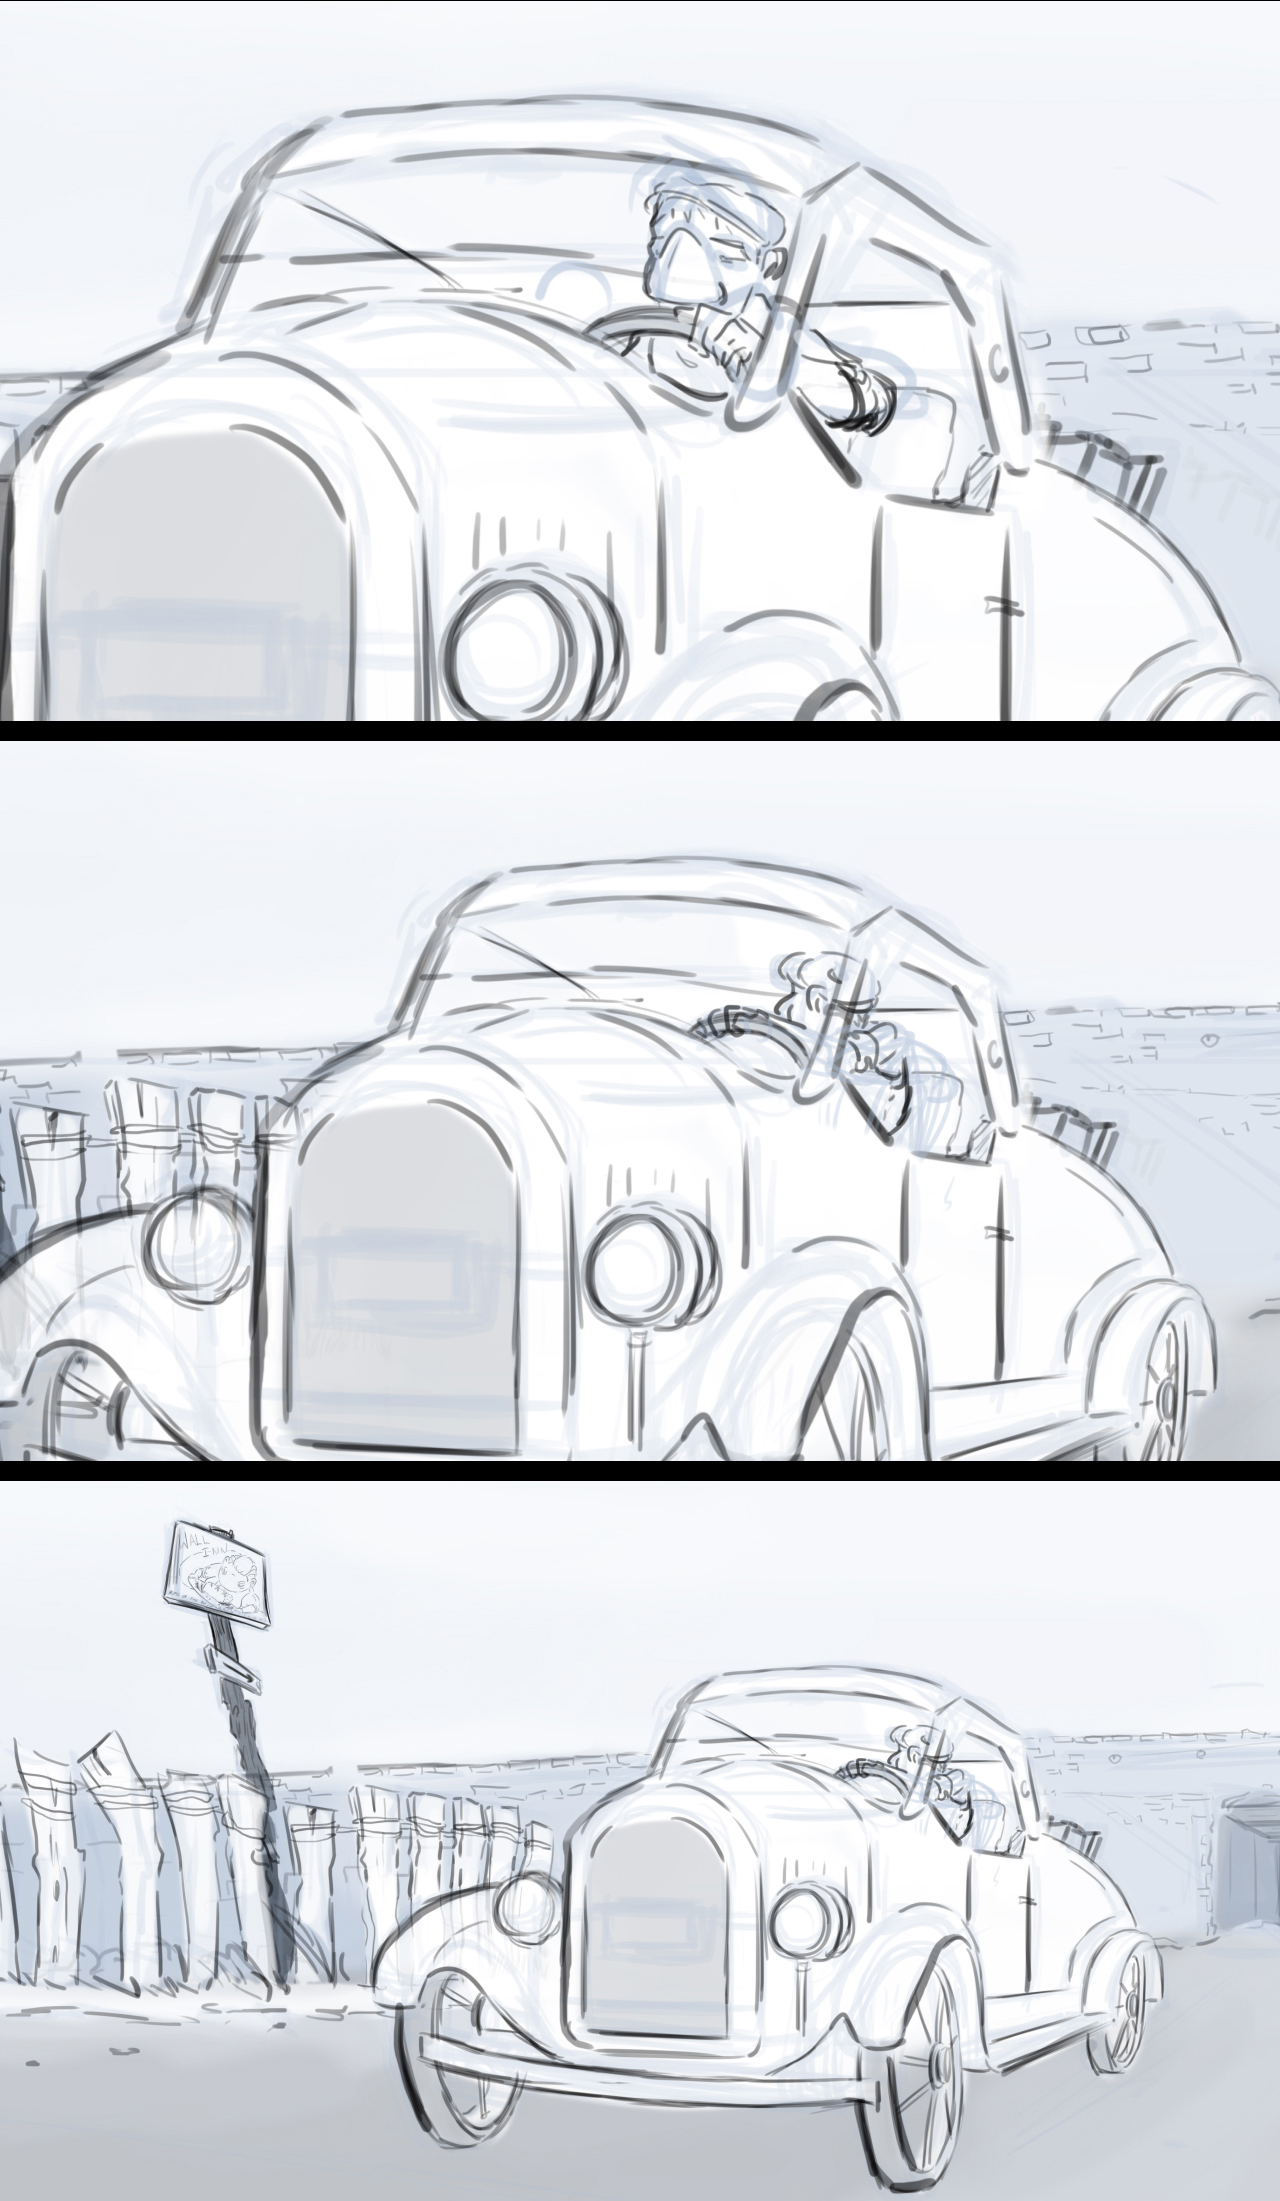 Storyboard sequence from an animated film. Sequence shows man driving car backwards as the camera pulls out.